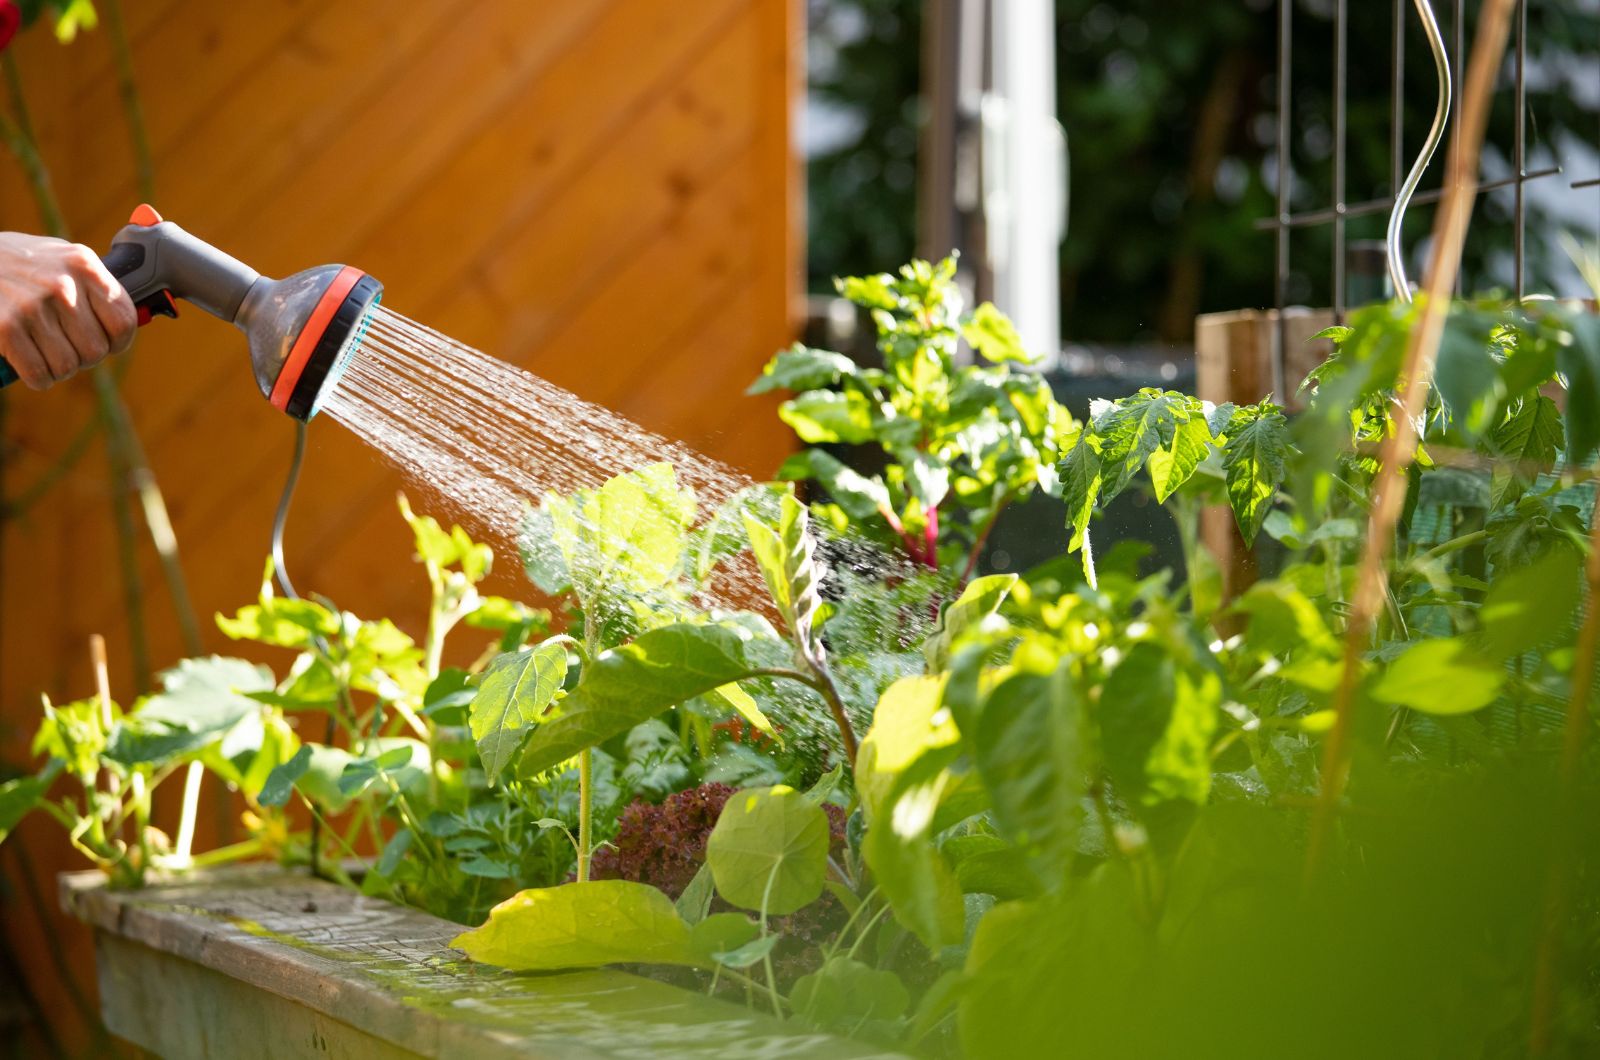 watering raised vegetable bed with hose